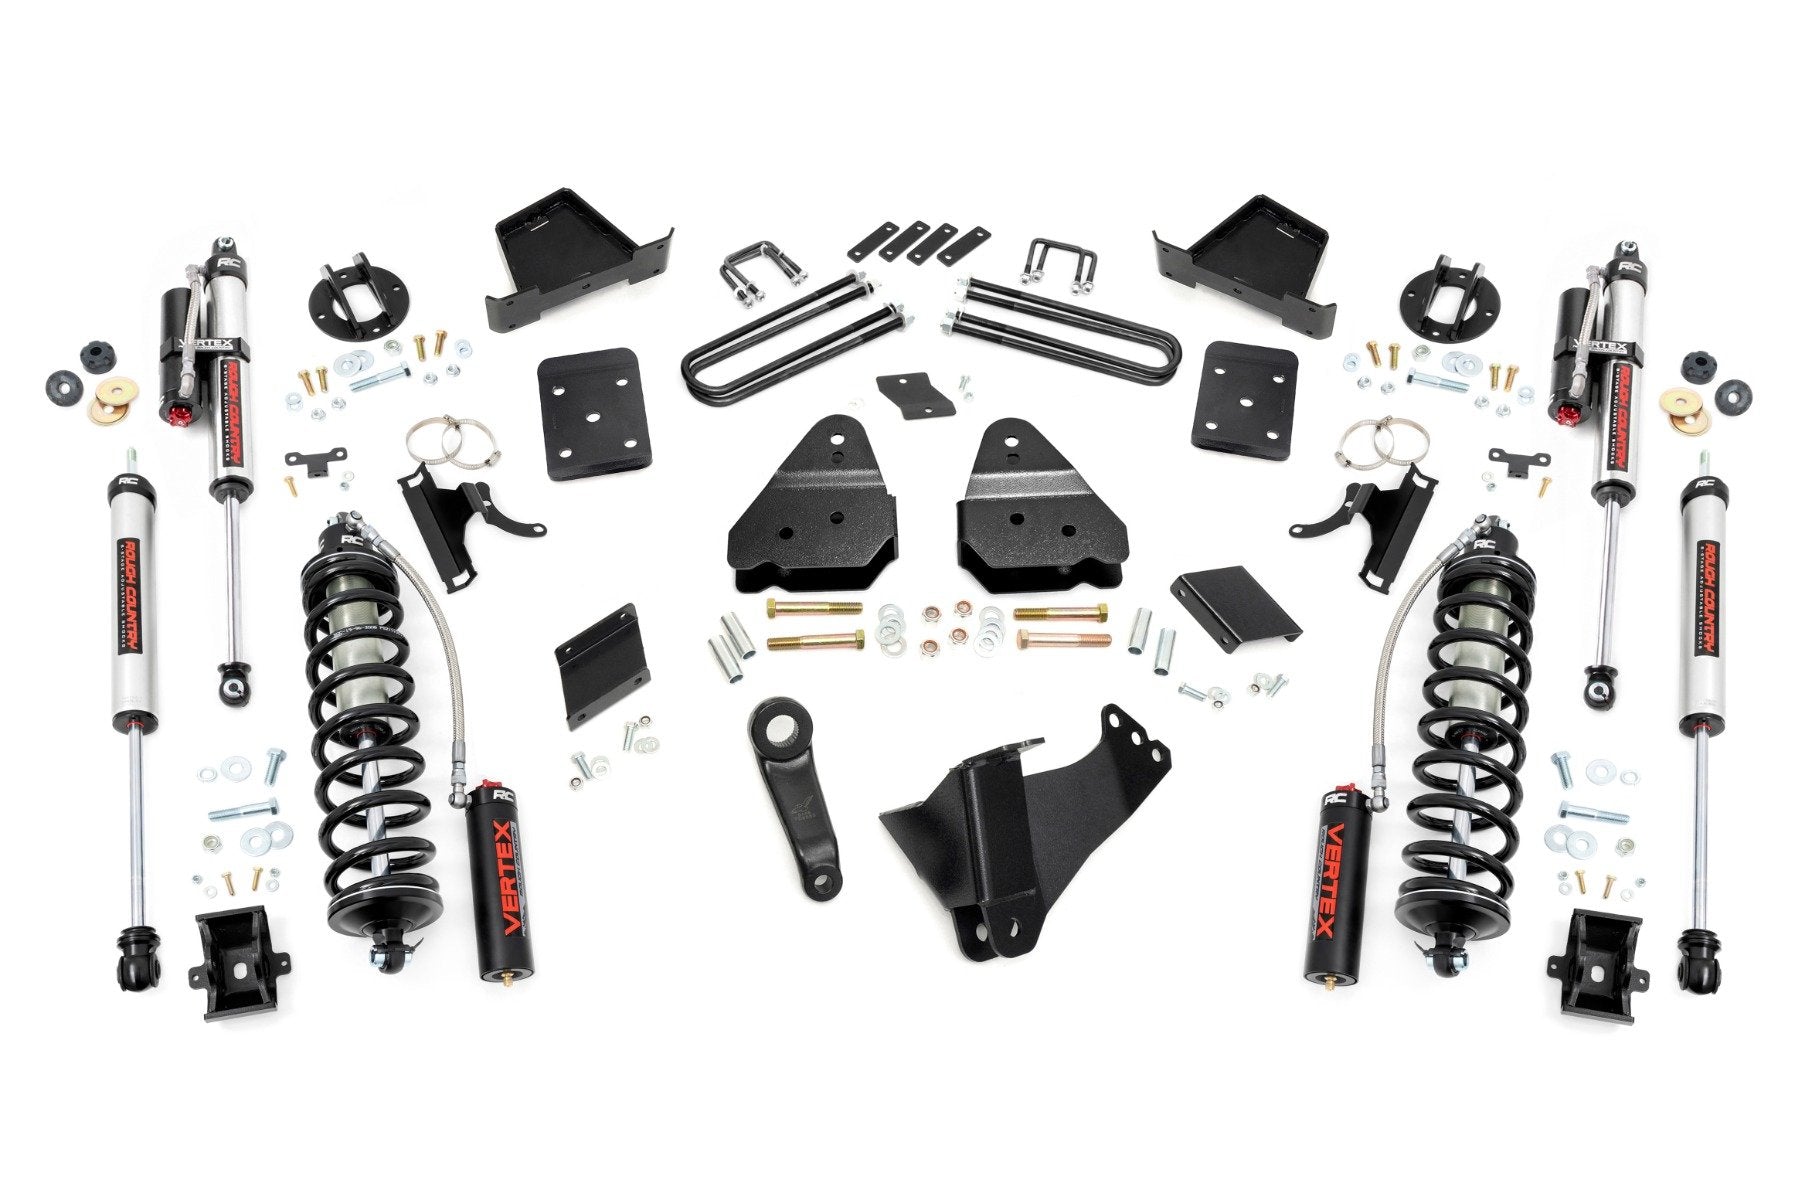 Rough Country 6 Inch Lift Kit  |  Diesel  |  OVLD  |  C/O Vertex | Ford F-250 Super Duty (11-14)